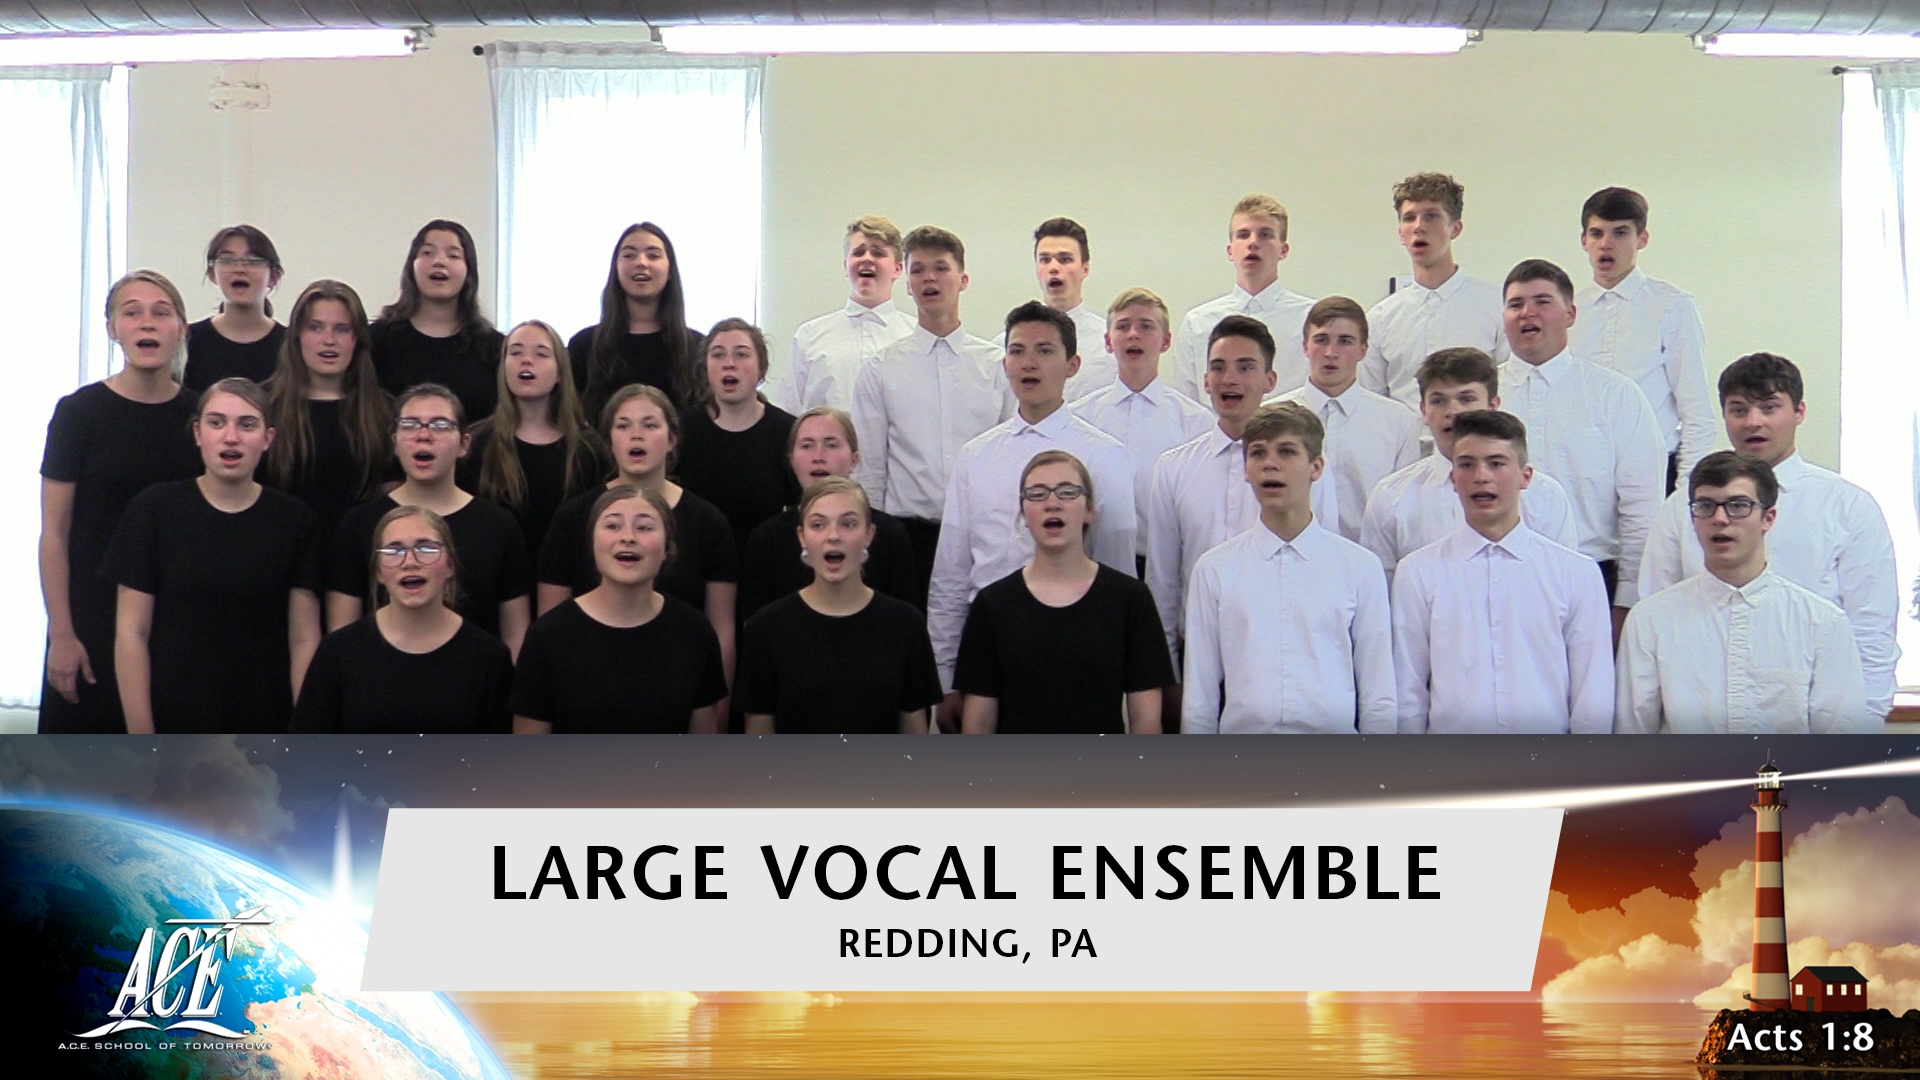 Large Vocal Ensemble, “Great Things” - ISC 2022